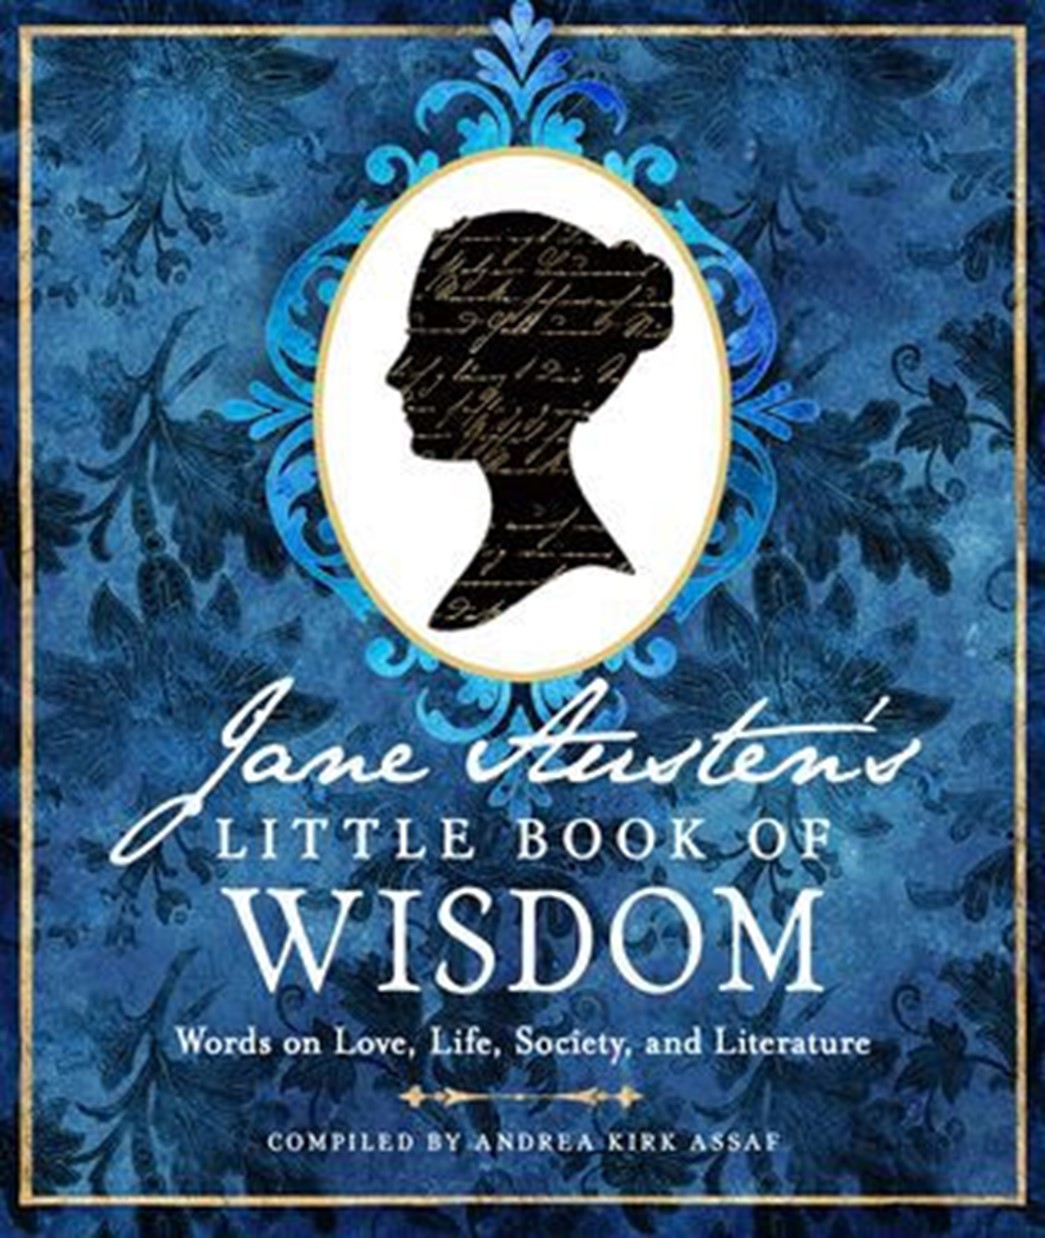 Jane Austen’s Little Book of Wisdom: Words on Love, Life, Society, and Literature